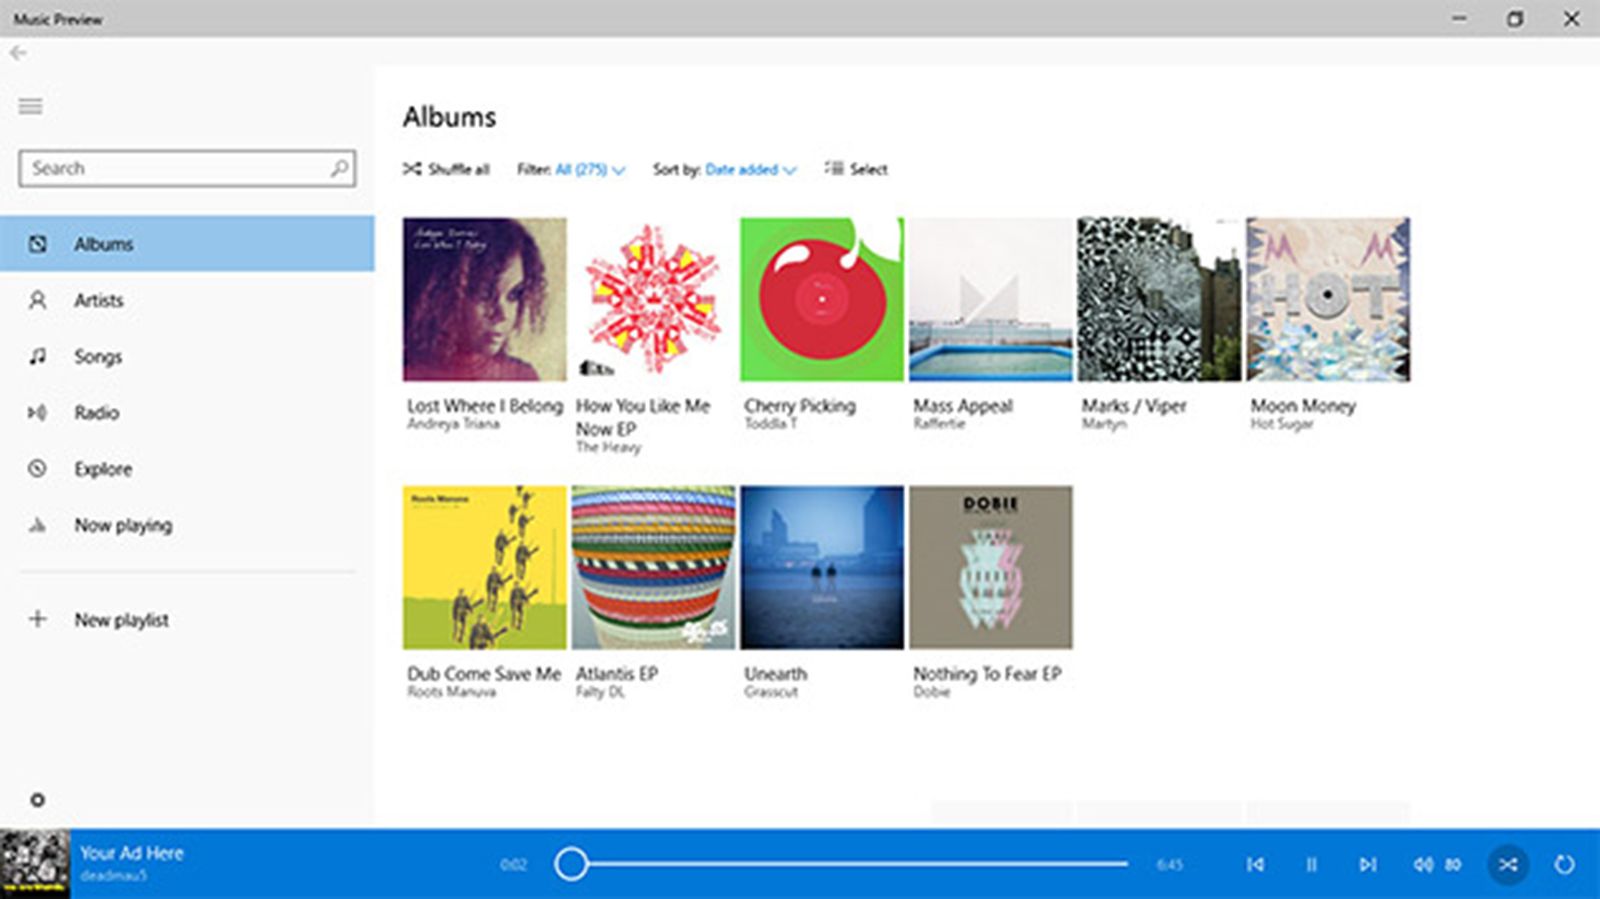 microsoft windows 10 apps shown off for video and music minus xbox branding image 1